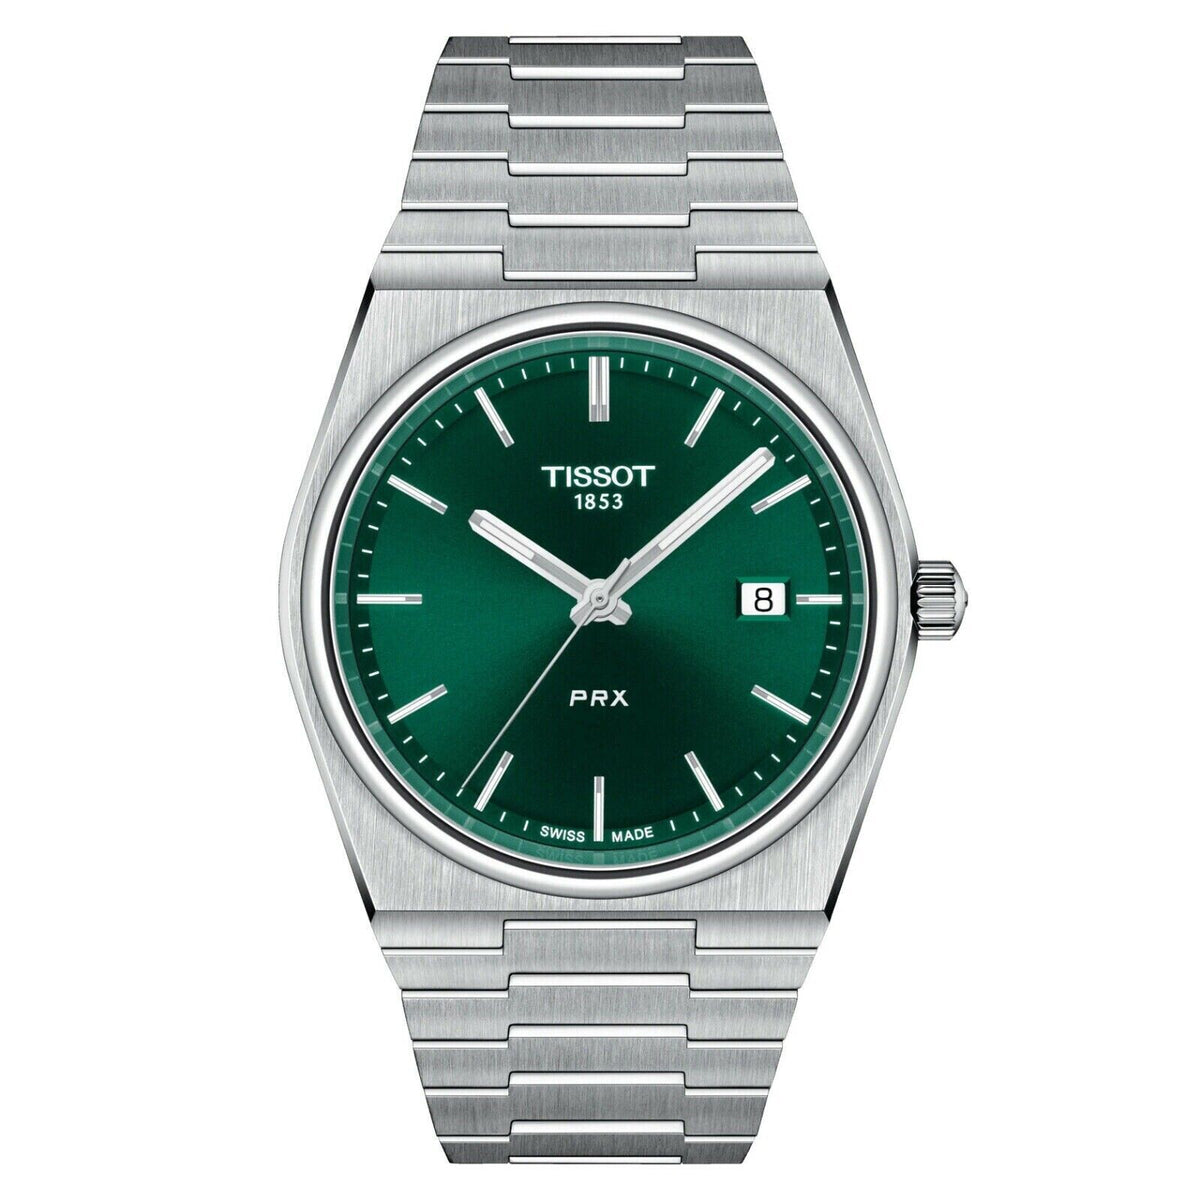 Tissot PRX Green Sunray Dial T-Classic Stainless Steel Swiss Watch T137.410.11.091.00